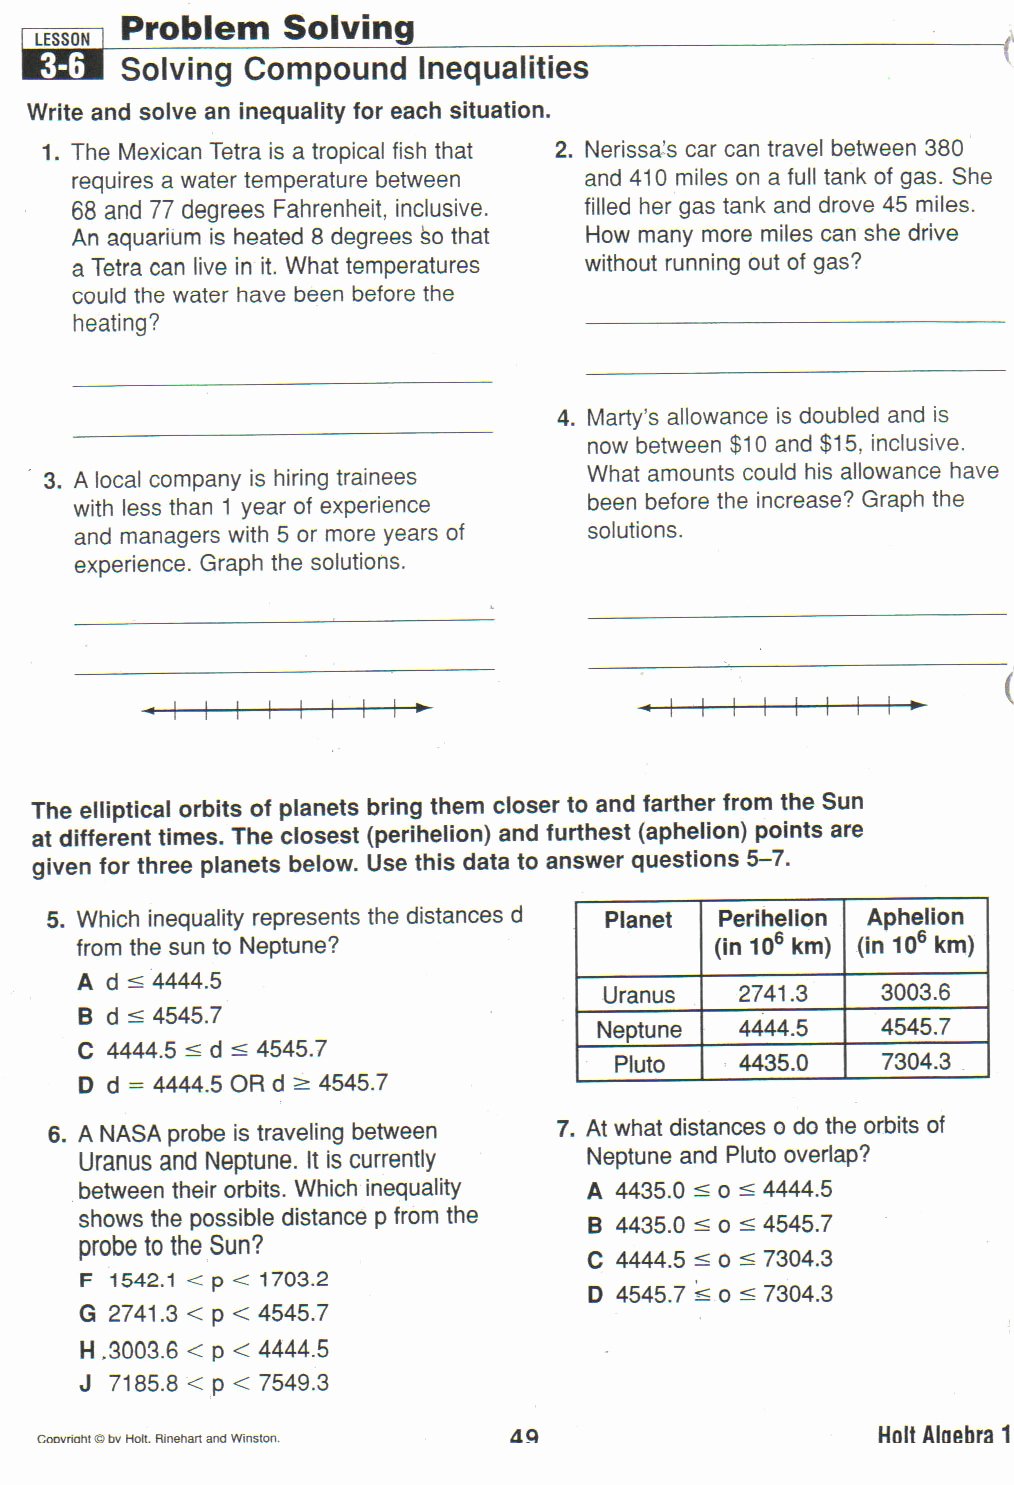 Compound Inequalities Worksheet Answers Fresh Learning Experience